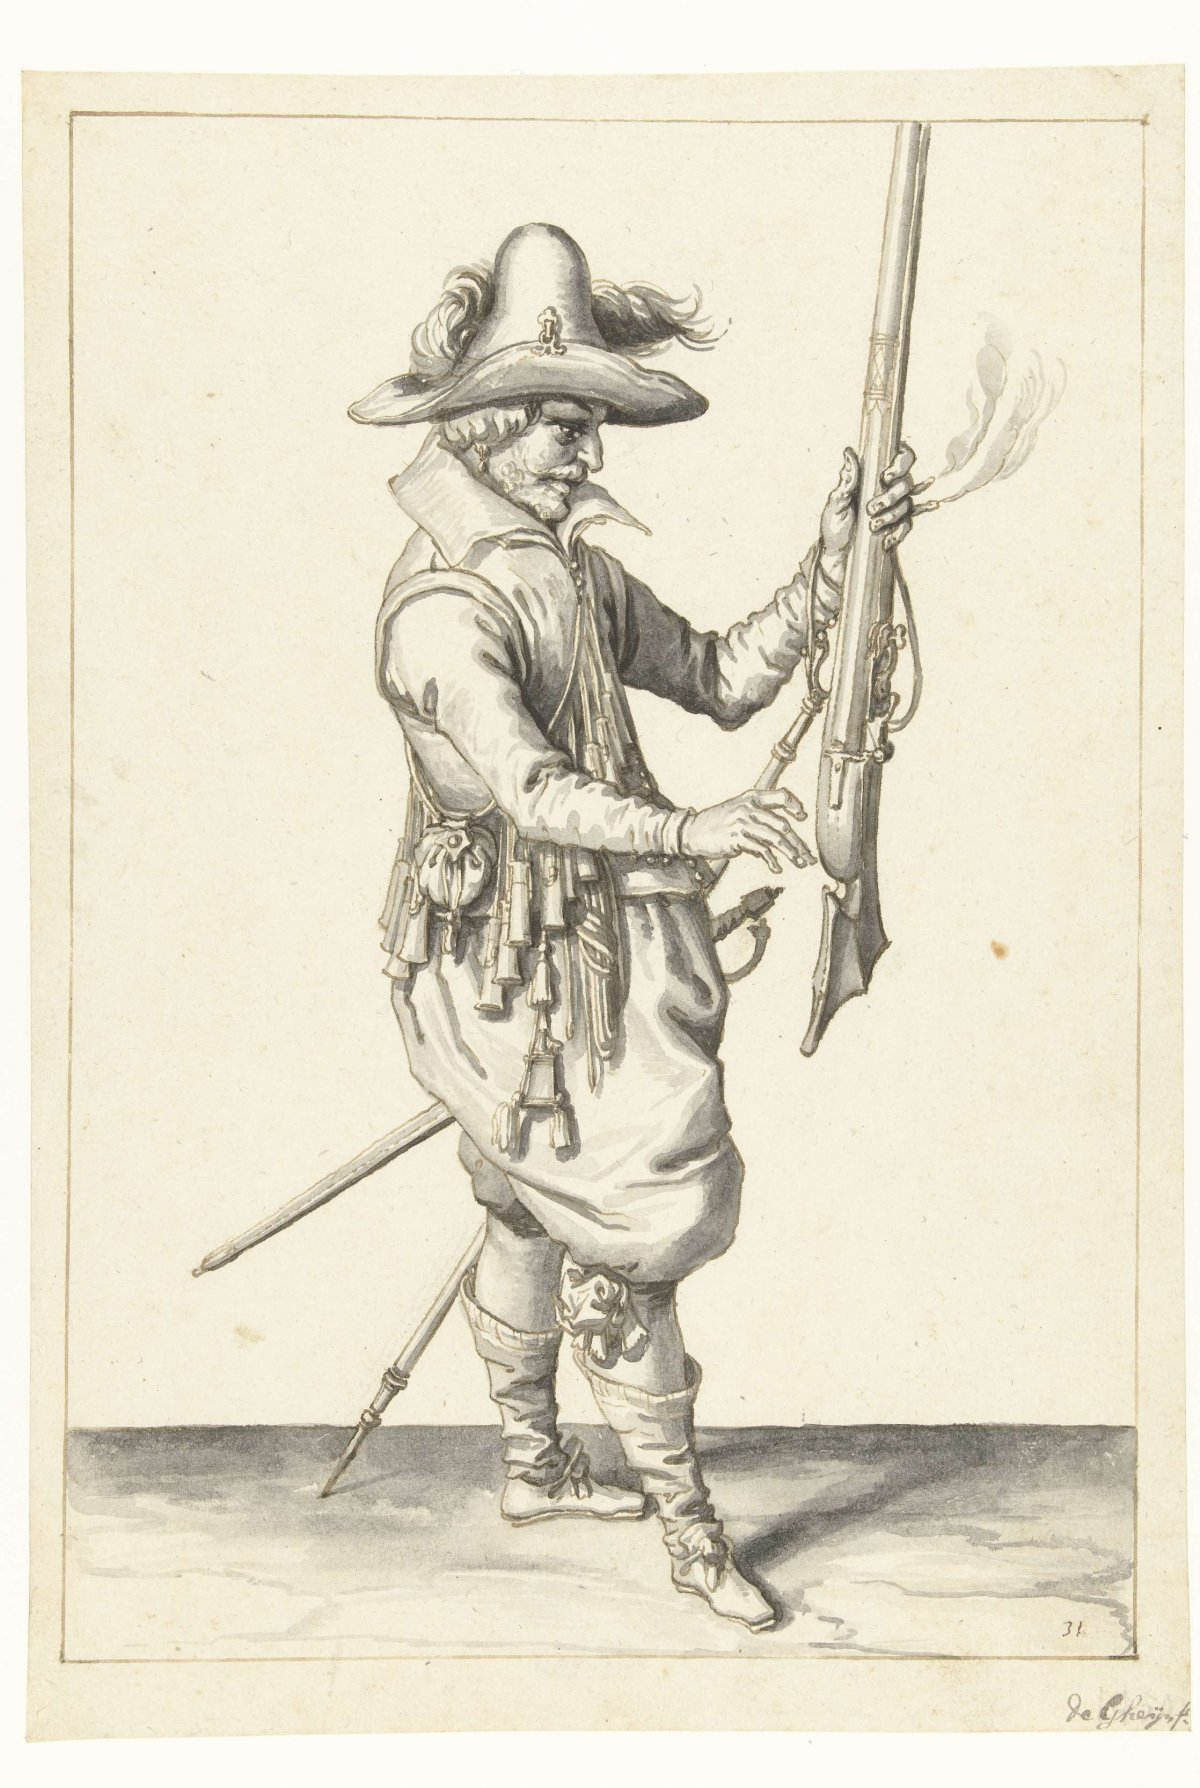 Soldier holding his musket upright with his left hand, Jacques de Gheyn (II), 1596 - 1606